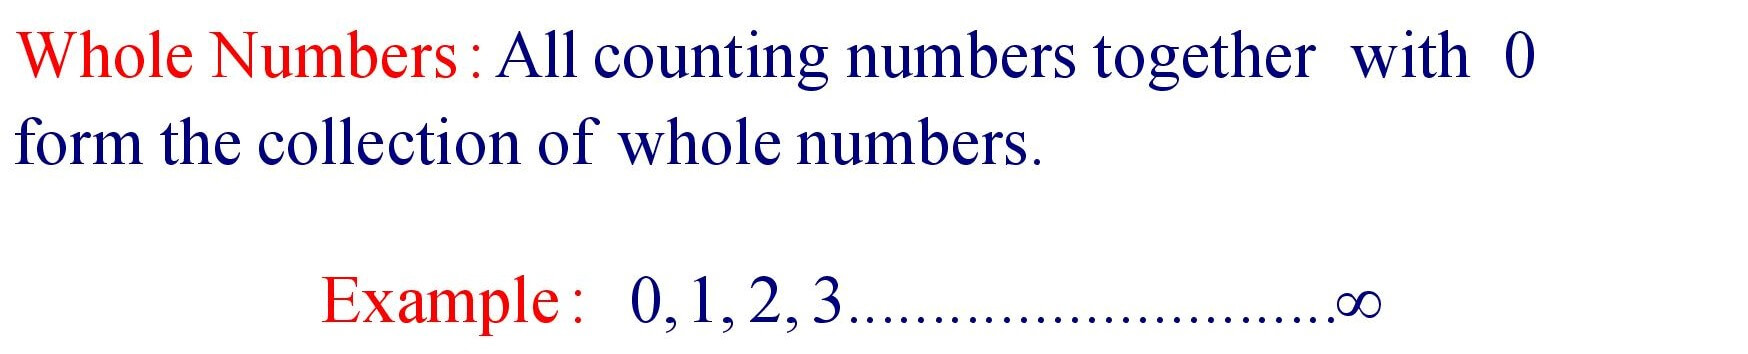 Whole Numbers Definition